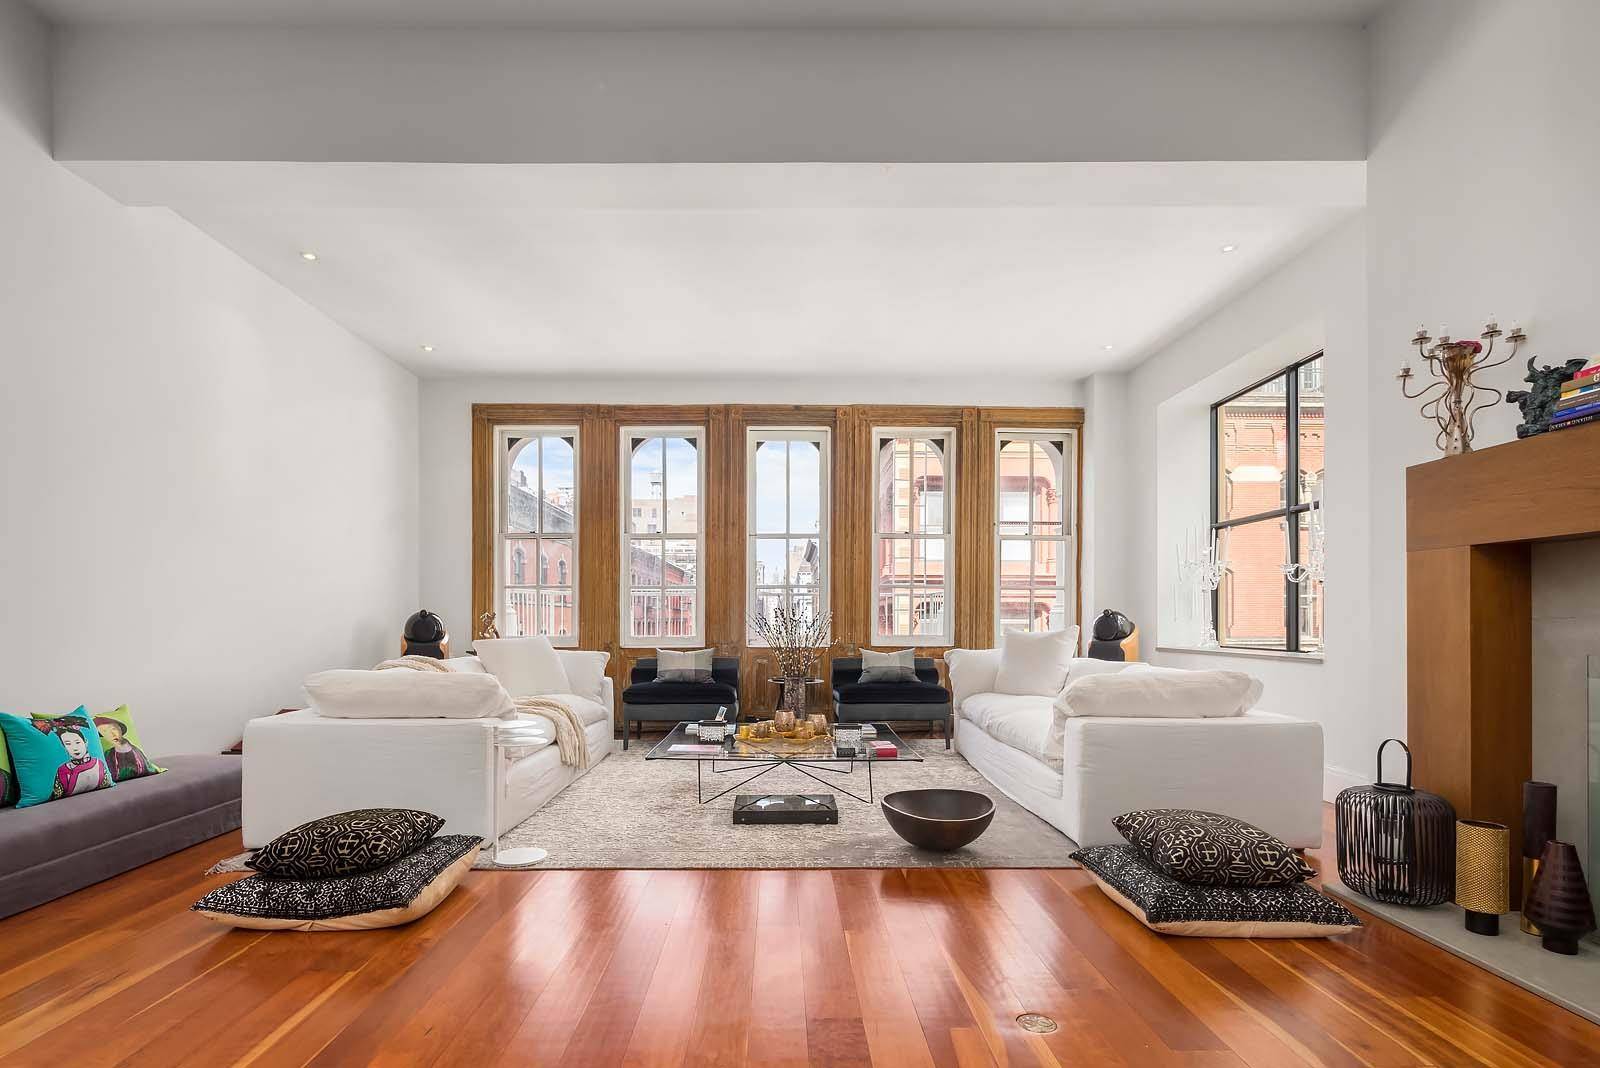 Avail June 14th A Chic SoHo Penthouse.